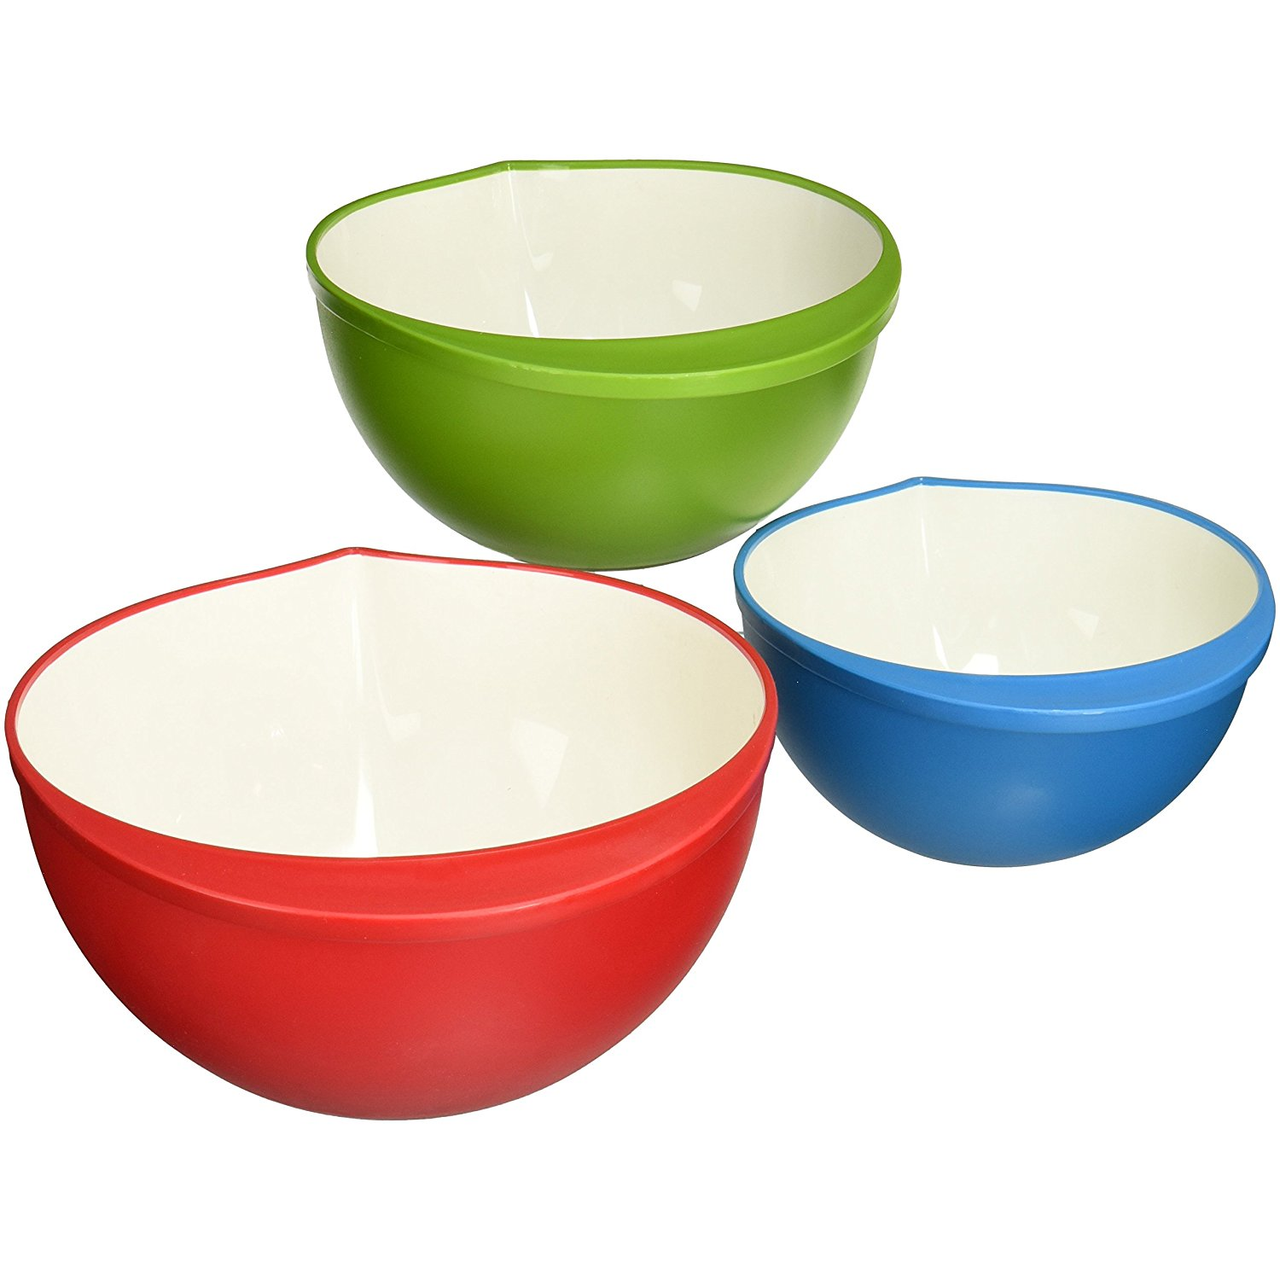 Trudeau Two-tone Nesting Mixing Bowls - Set of 3 - Red, Green, Blue (TR  0999053)